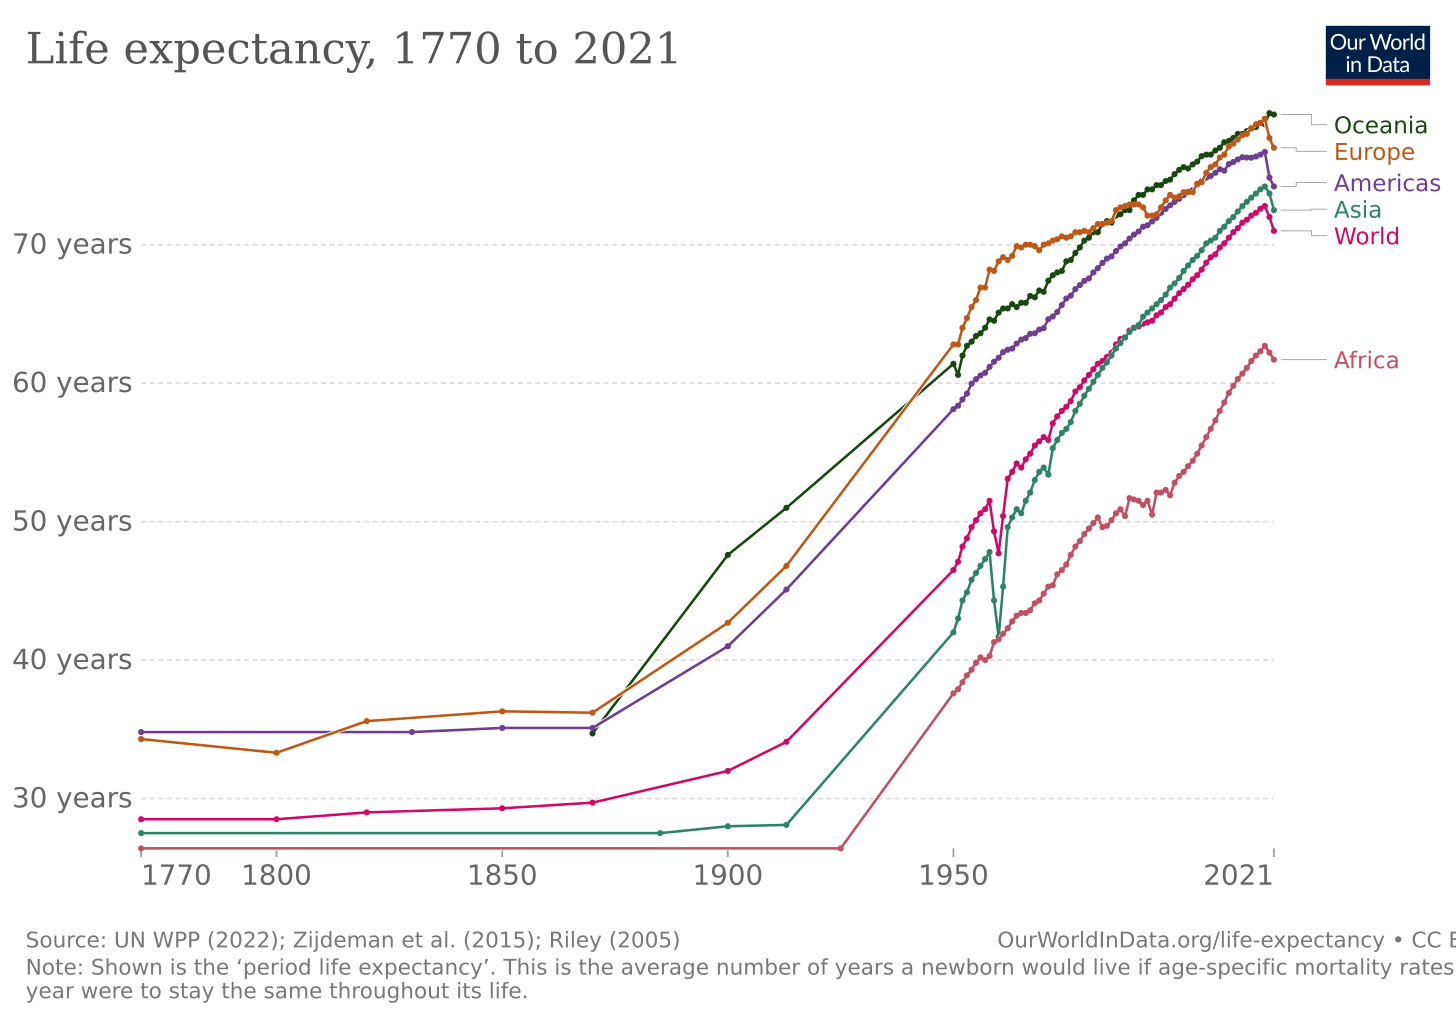 Life Expectancy - Our World in Data